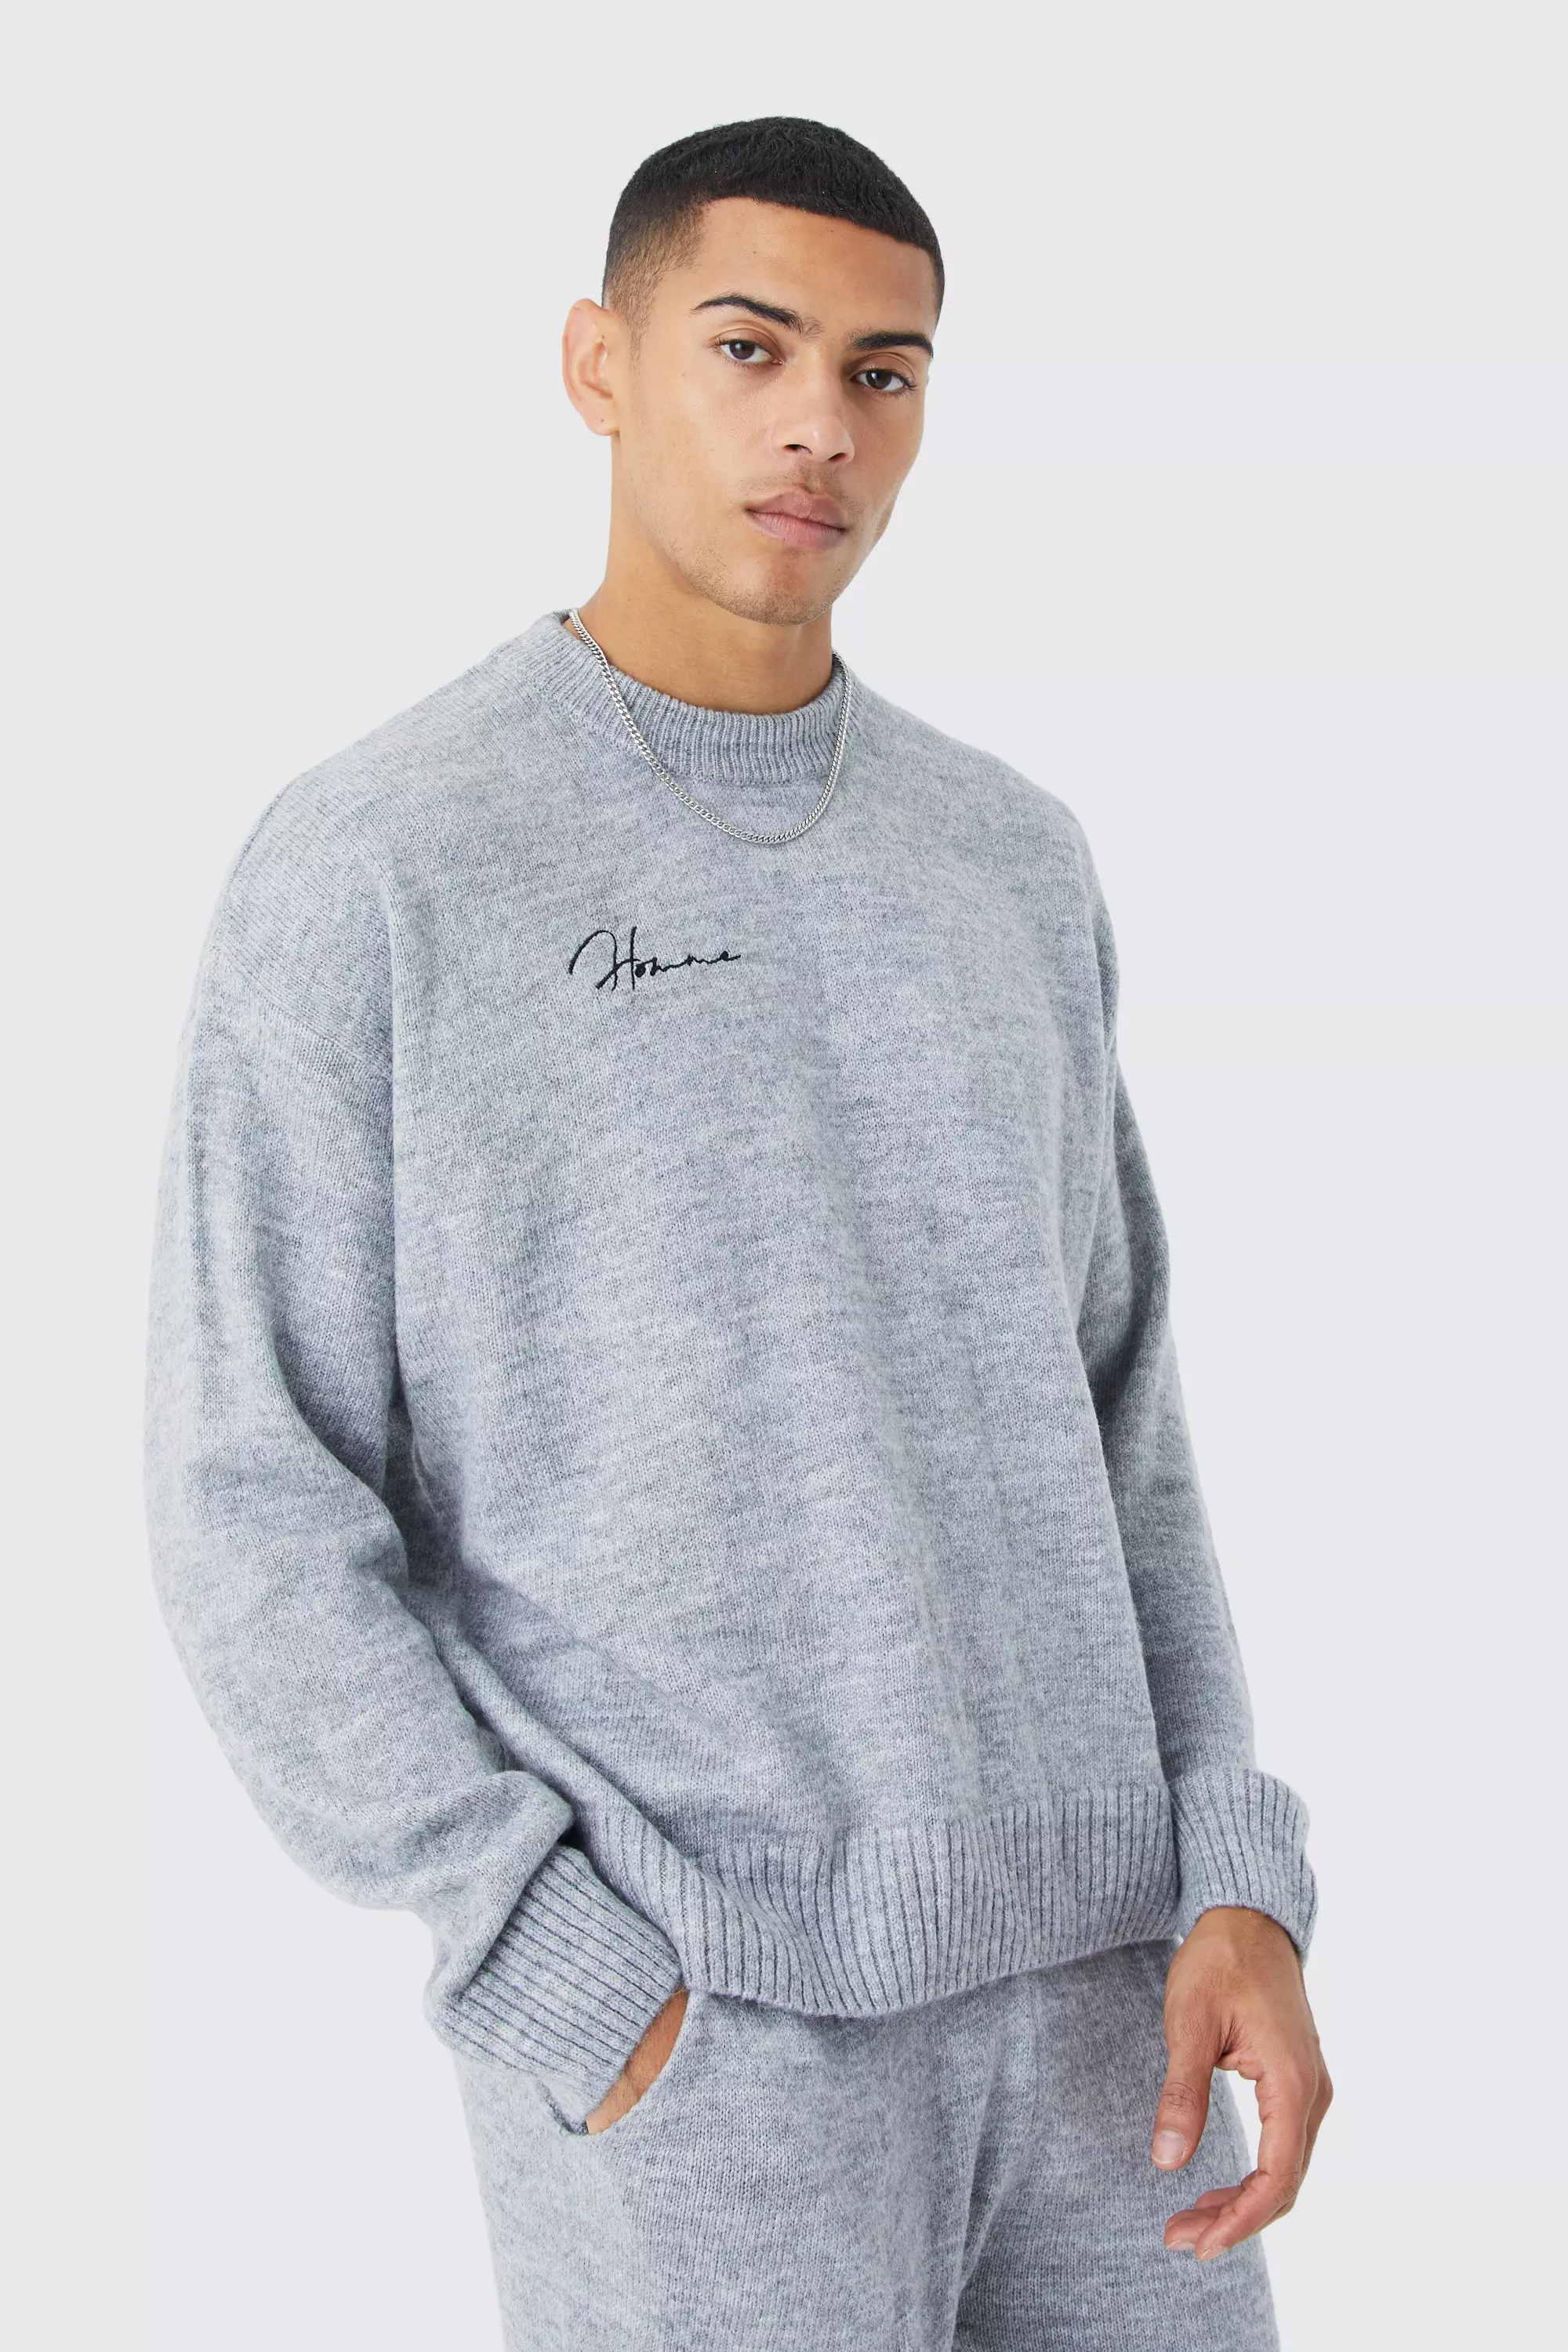 Charcoal Grey Boxy Homme Extended Neck Brushed Rib Knit Sweater